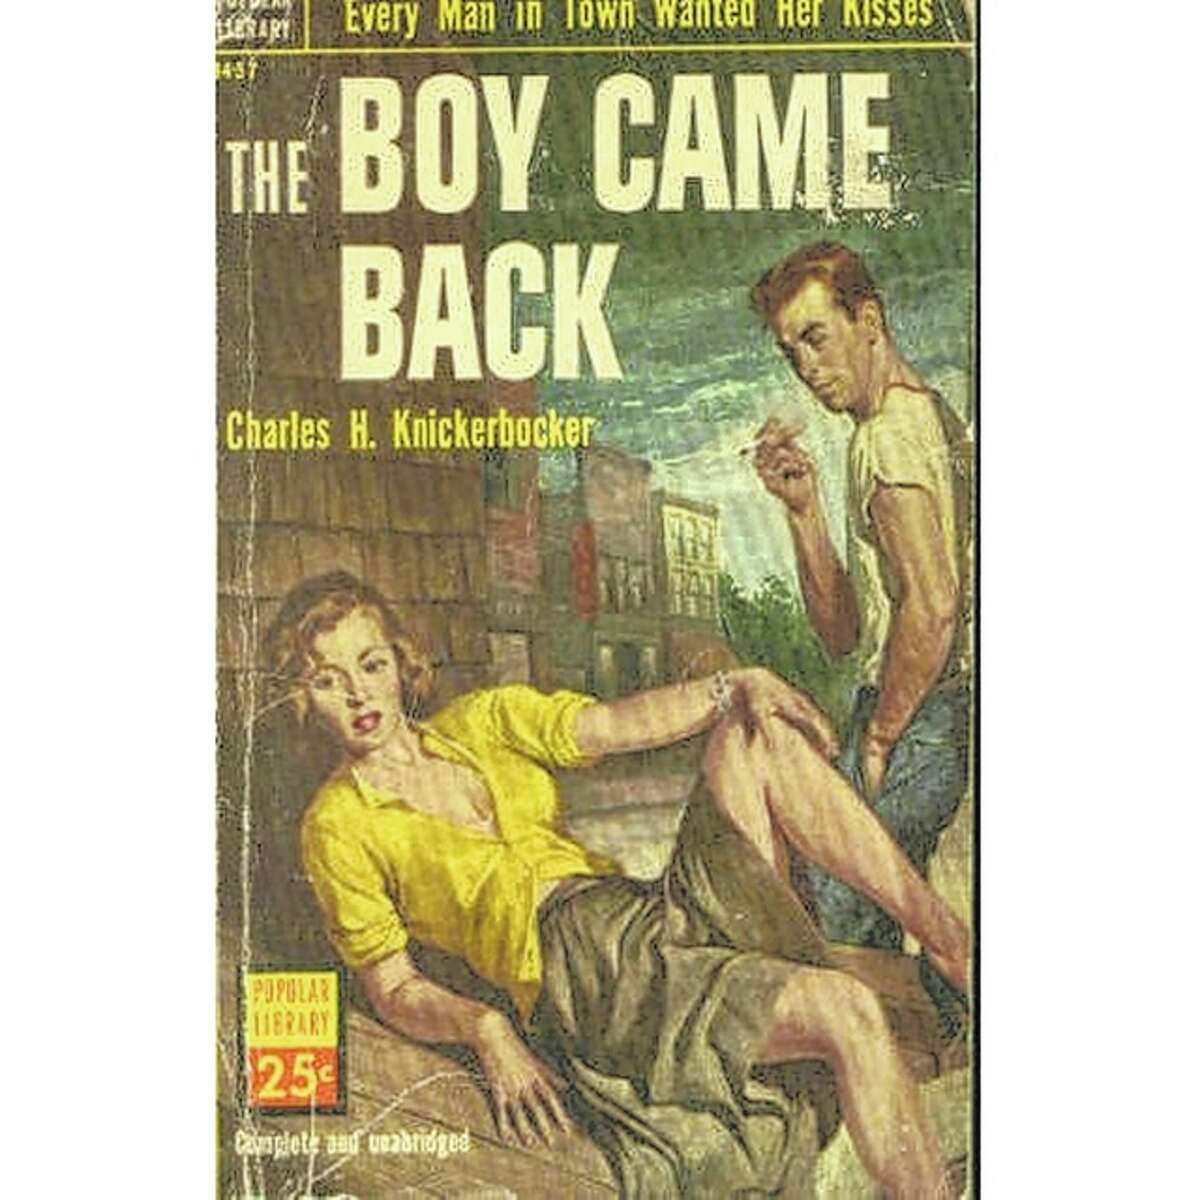 Charles H. Knickerbocker’s novel “The Boy Came Back” ignited a furor in the mid-1950s when a teenager borrowed a copy of it provided by the Illinois State Library.